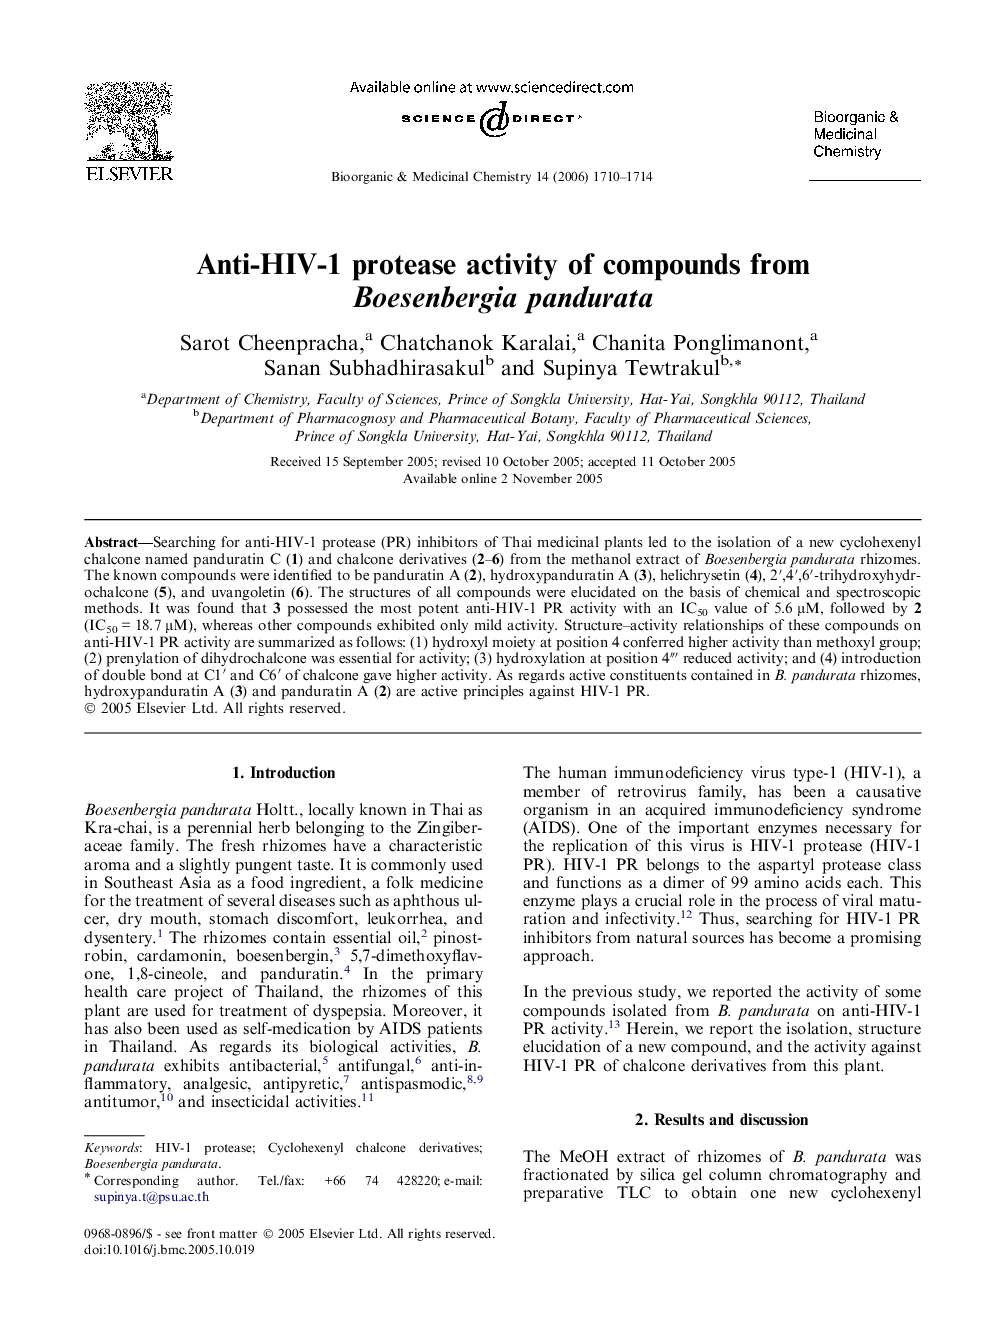 Anti-HIV-1 protease activity of compounds from Boesenbergia pandurata